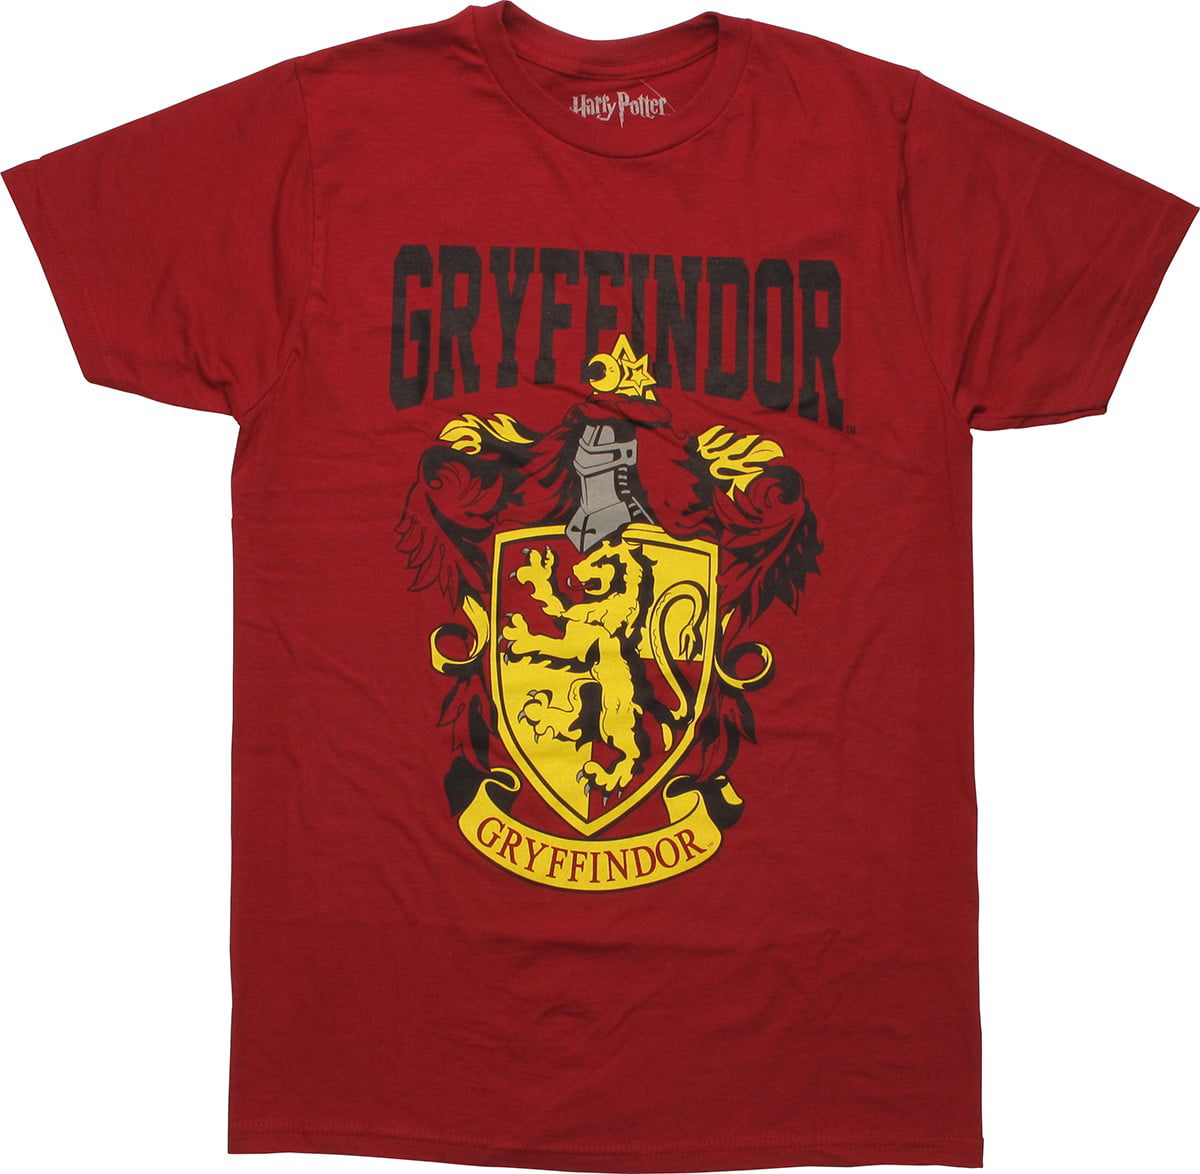 New Youth Size Harry Potter T Shirt Gryffindor Coat Of Arms Size 78